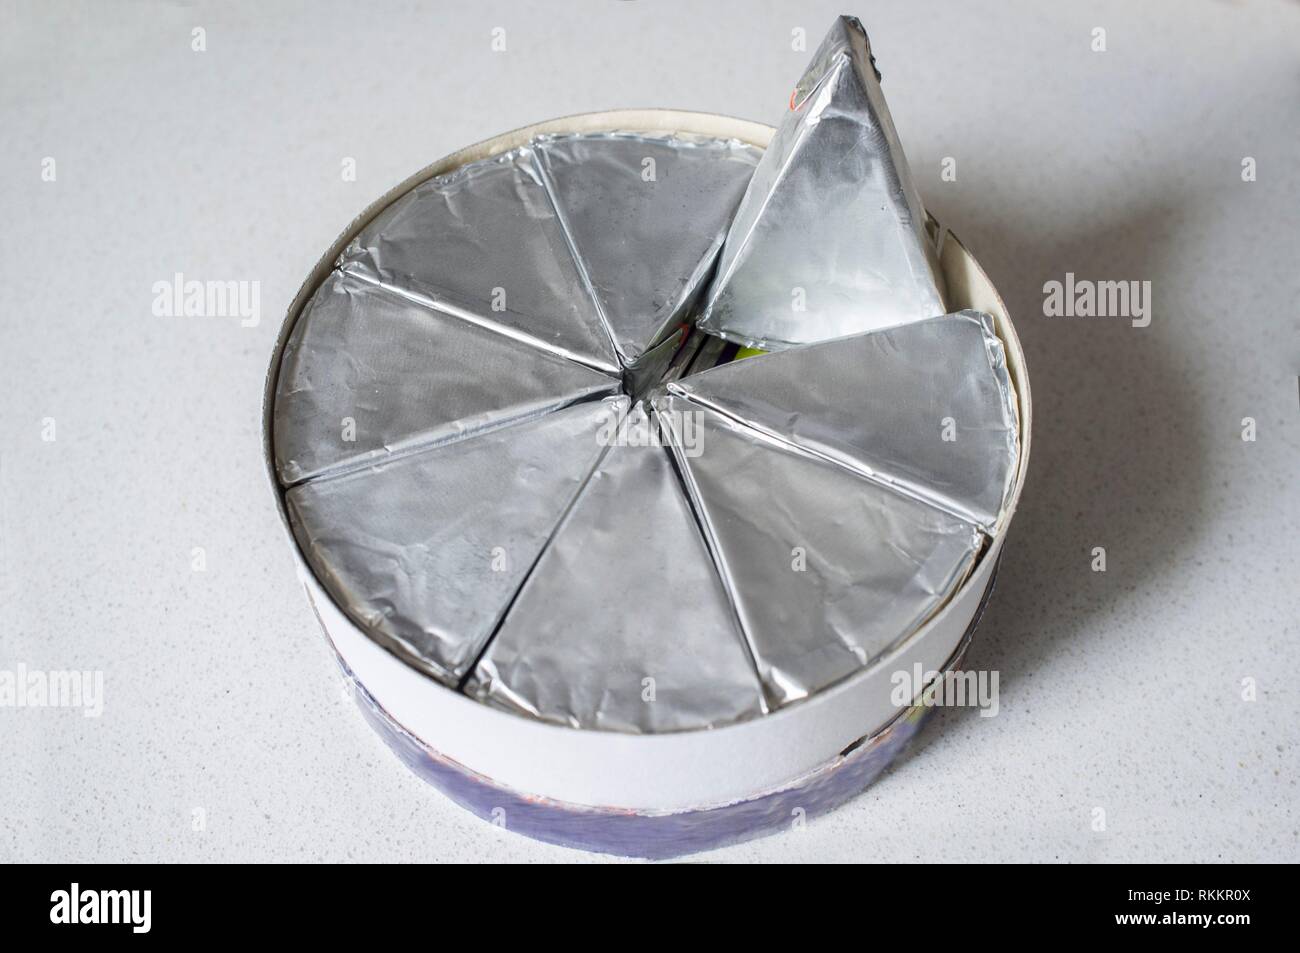 Round cardboard box with melted cheese in aluminium foil. Naural light. Stock Photo